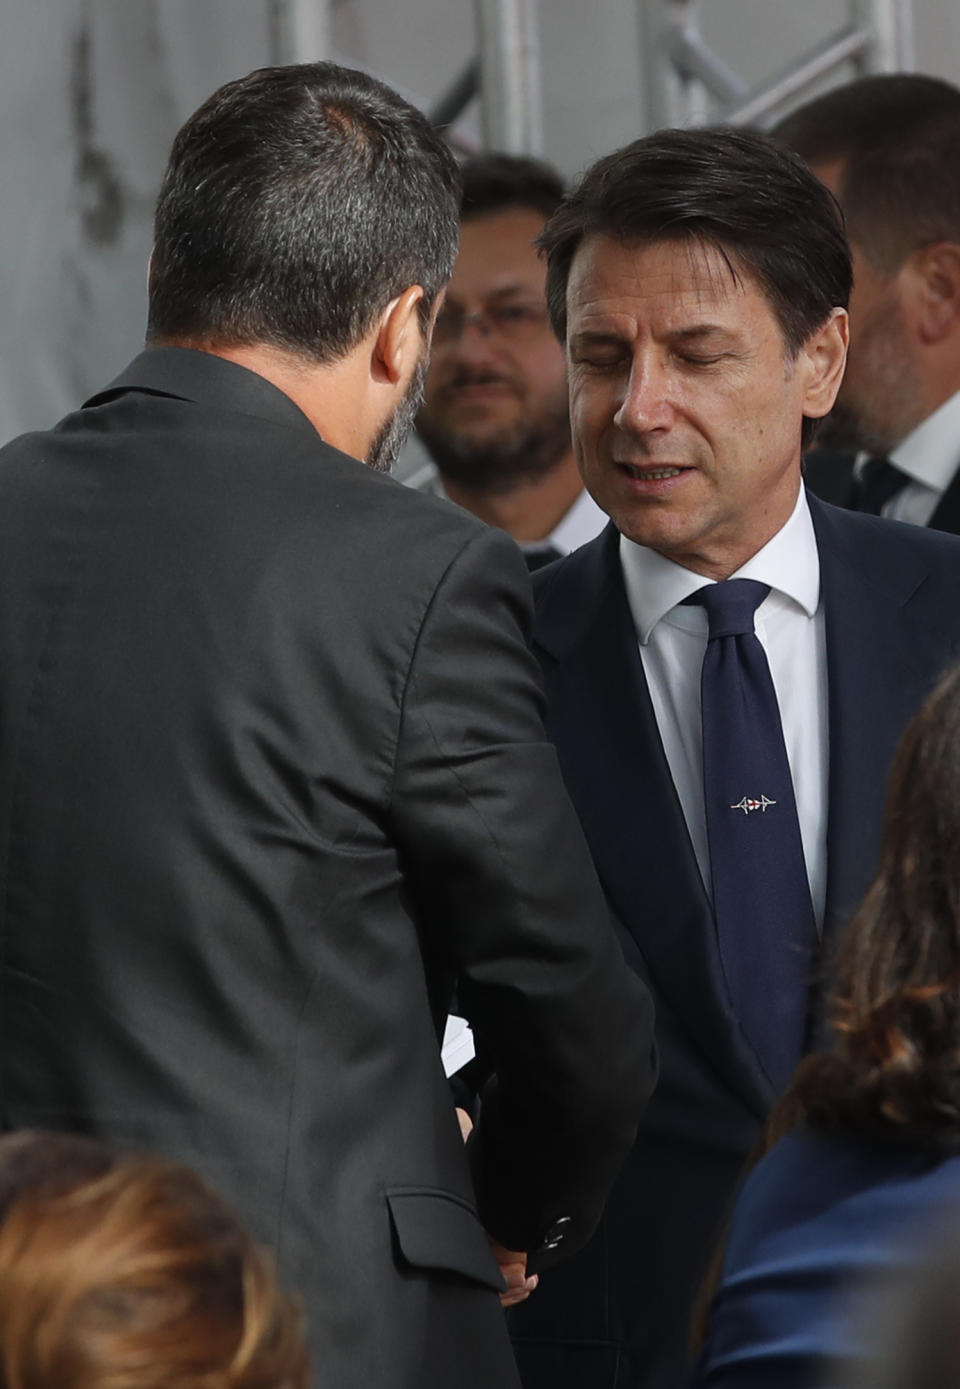 Italian Premier Giuseppe Conte shakes hands with Interior Minister Matteo Salvini as they attend a remembrance ceremony to mark the first anniversary of the Morandi bridge collapse, in Genoa, Italy, Wednesday, Aug. 14, 2019. The Morandi bridge was a road viaduct on the A10 motorway in Genoa, that collapsed one year ago killing 43 people. (AP Photo/Antonio Calanni)